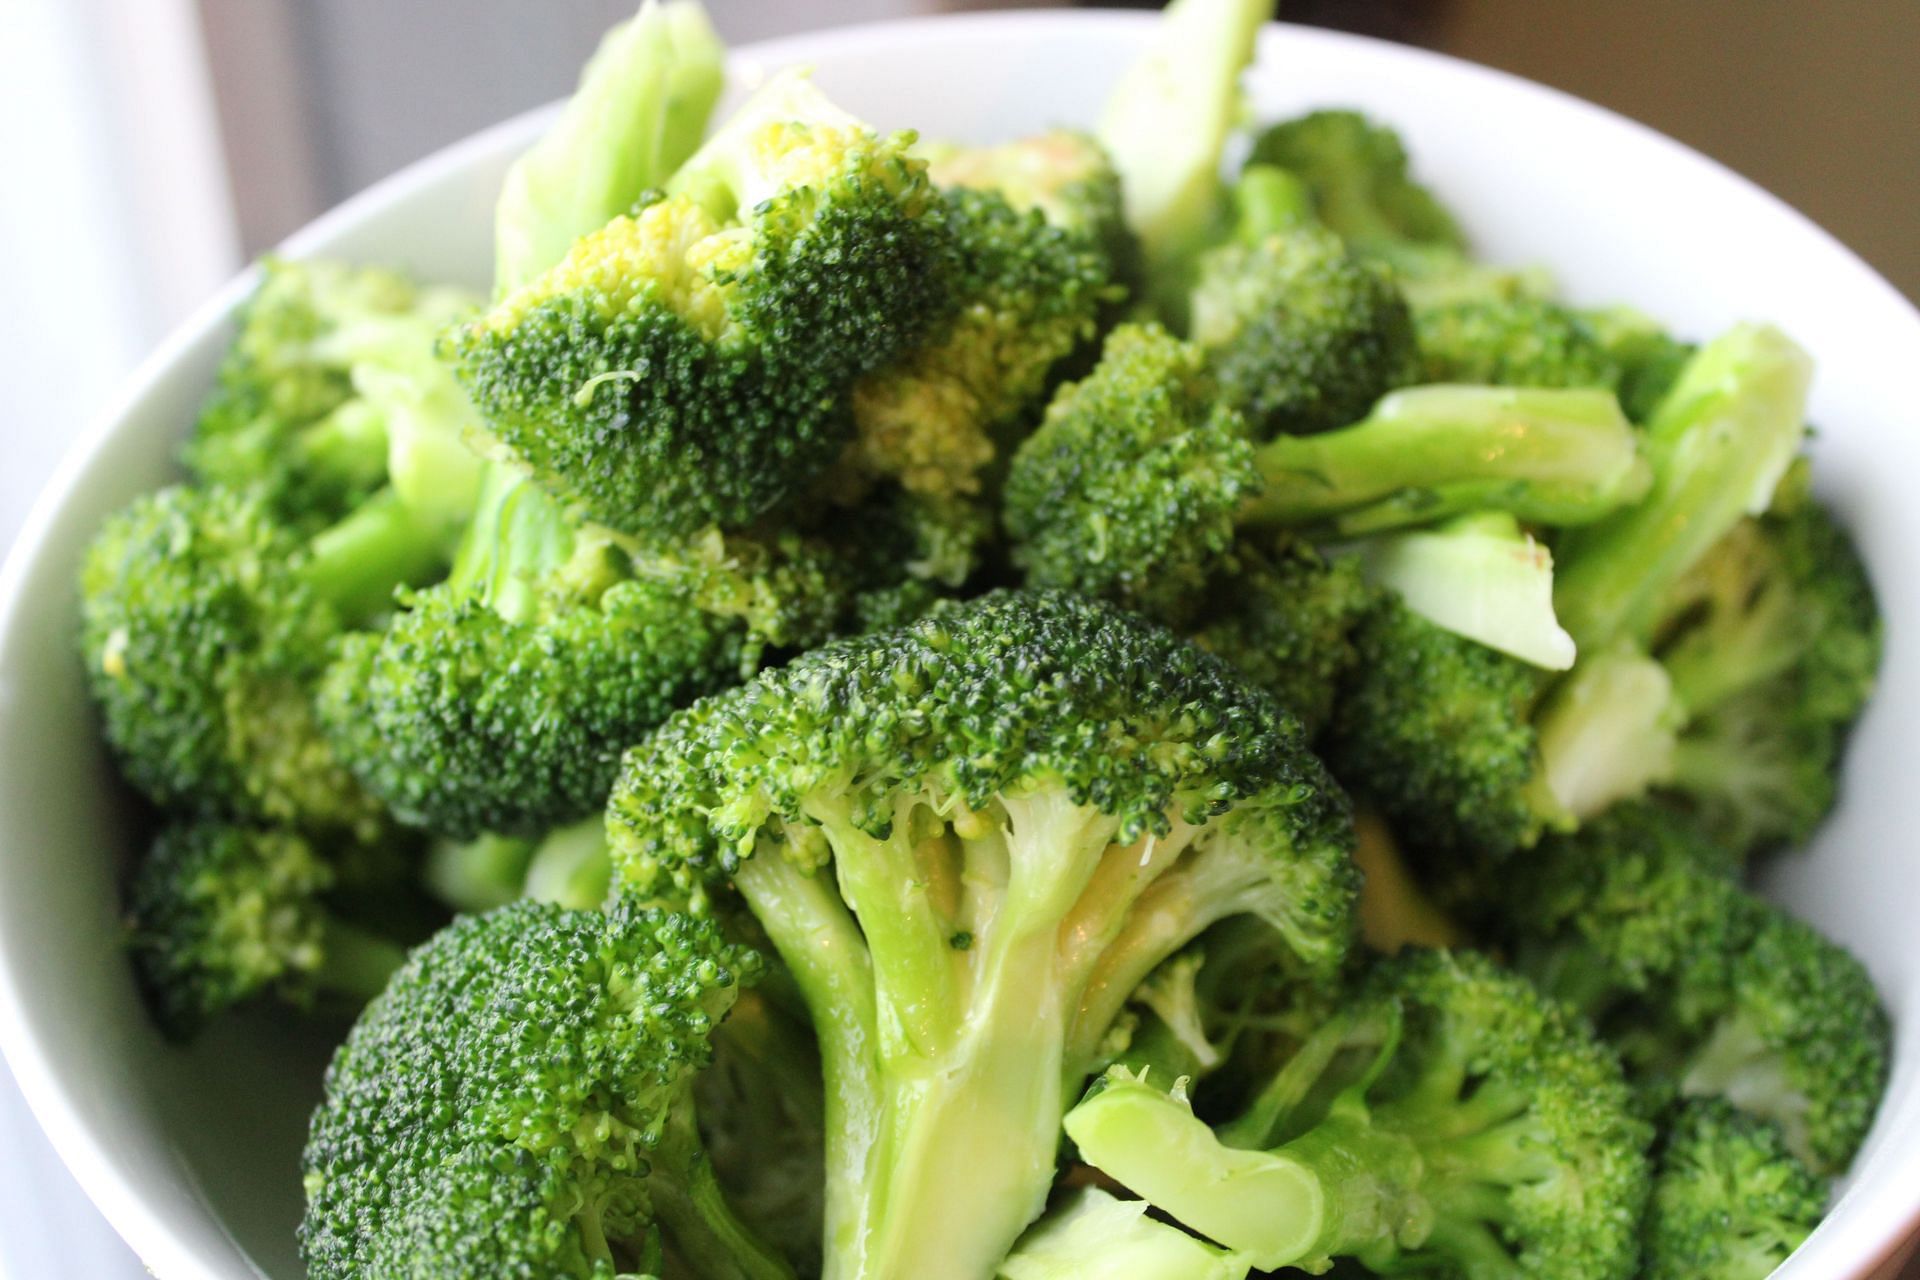 Broccoli is a superfood. (Image via Unsplash/Tyrell Fitness and Nutrition)